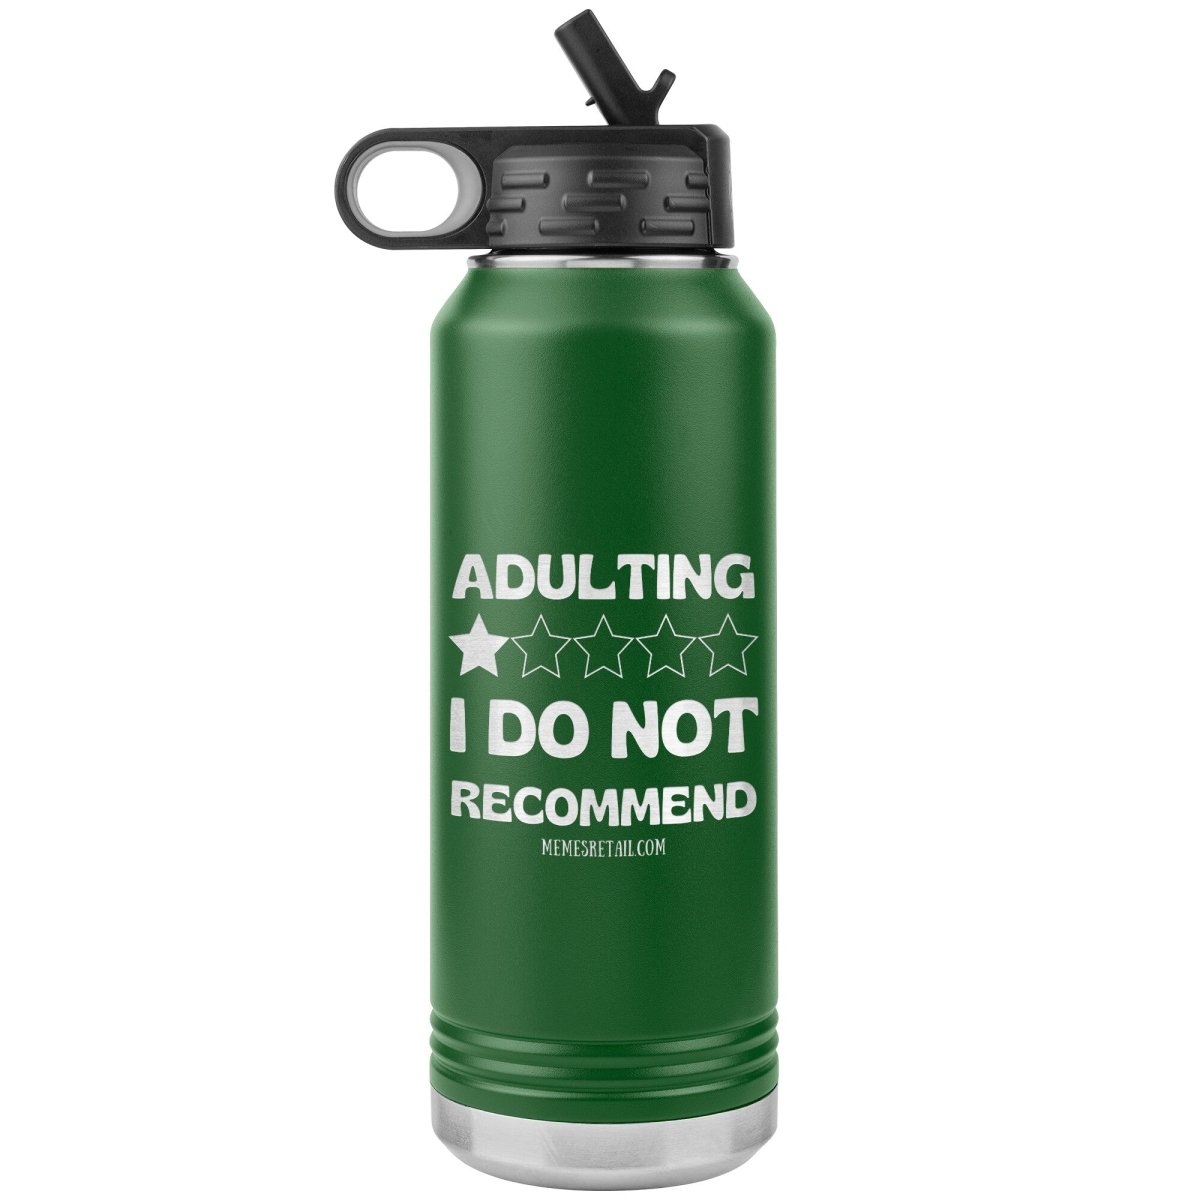 Adulting, 1 Star, I do not recommend 32oz Water Tumblers, Green - MemesRetail.com